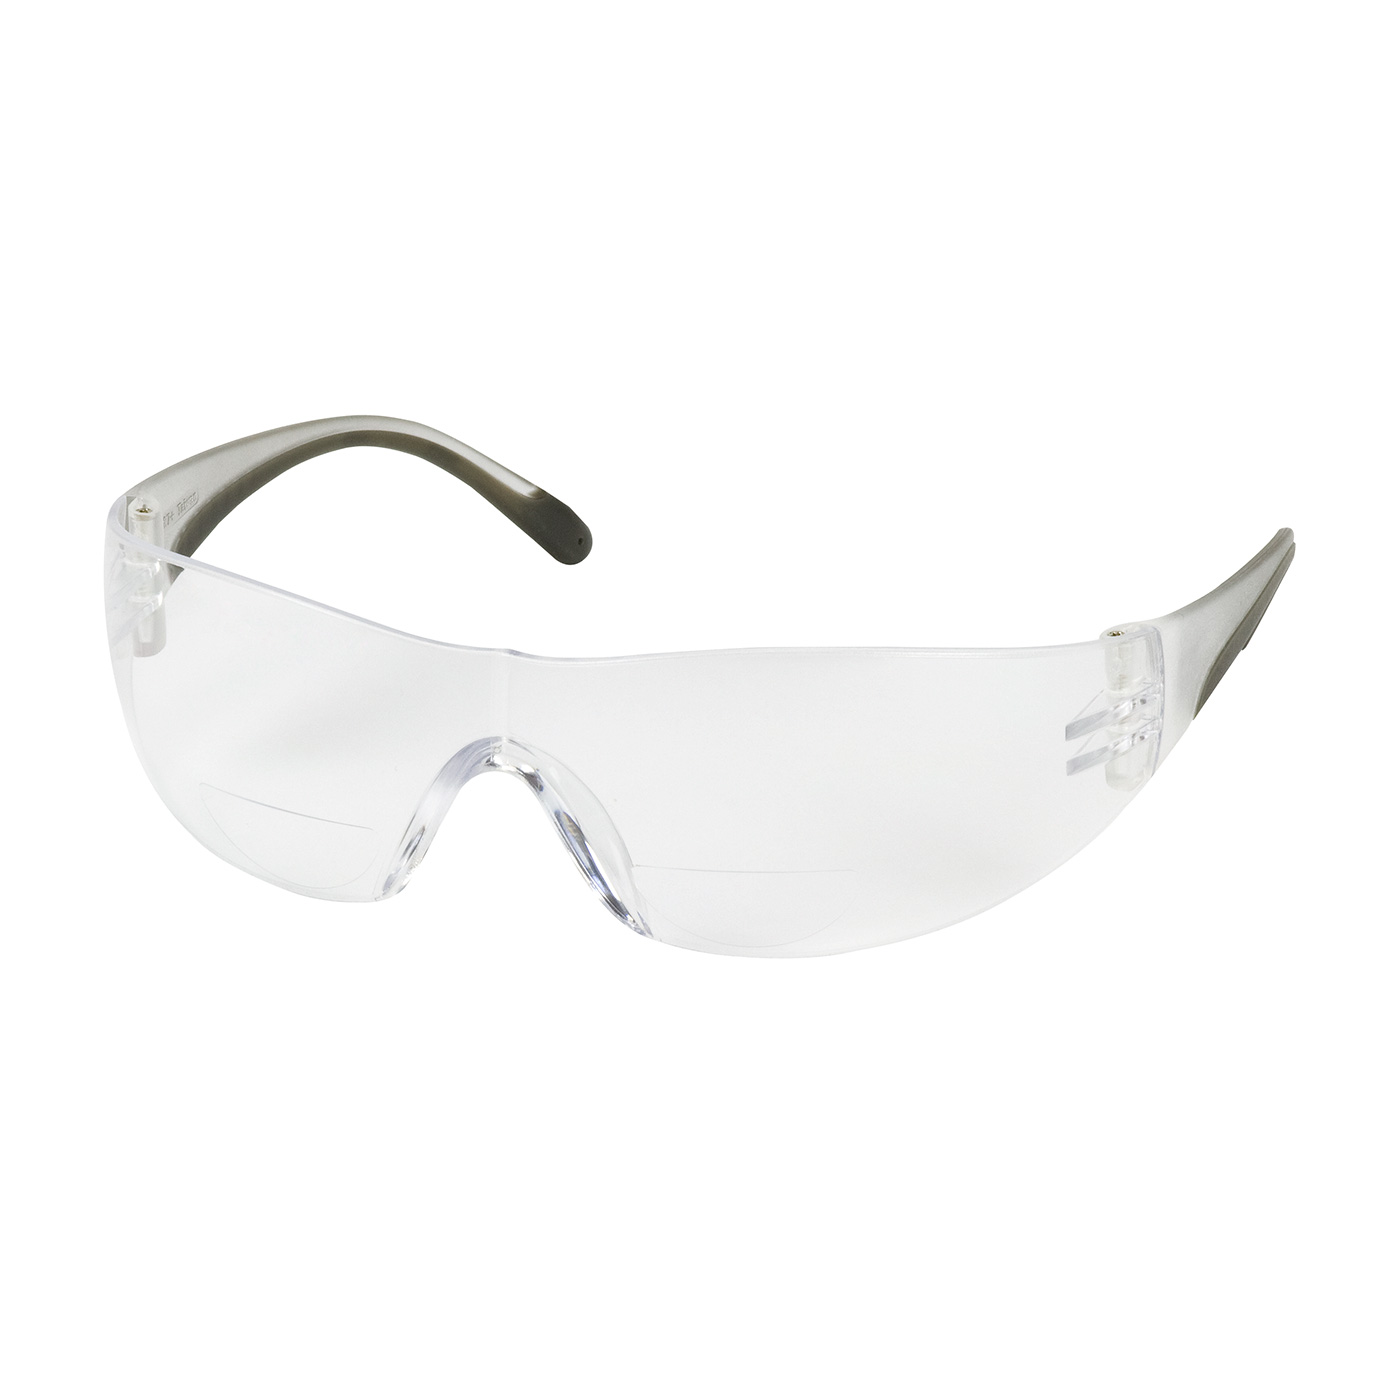 PIP 250-27-0020 Zenon Z12R Rimless Safety Readers with Clear Temple, Clear Lens and Anti-Scratch Coating - +2.00 Diopter PID-250270020